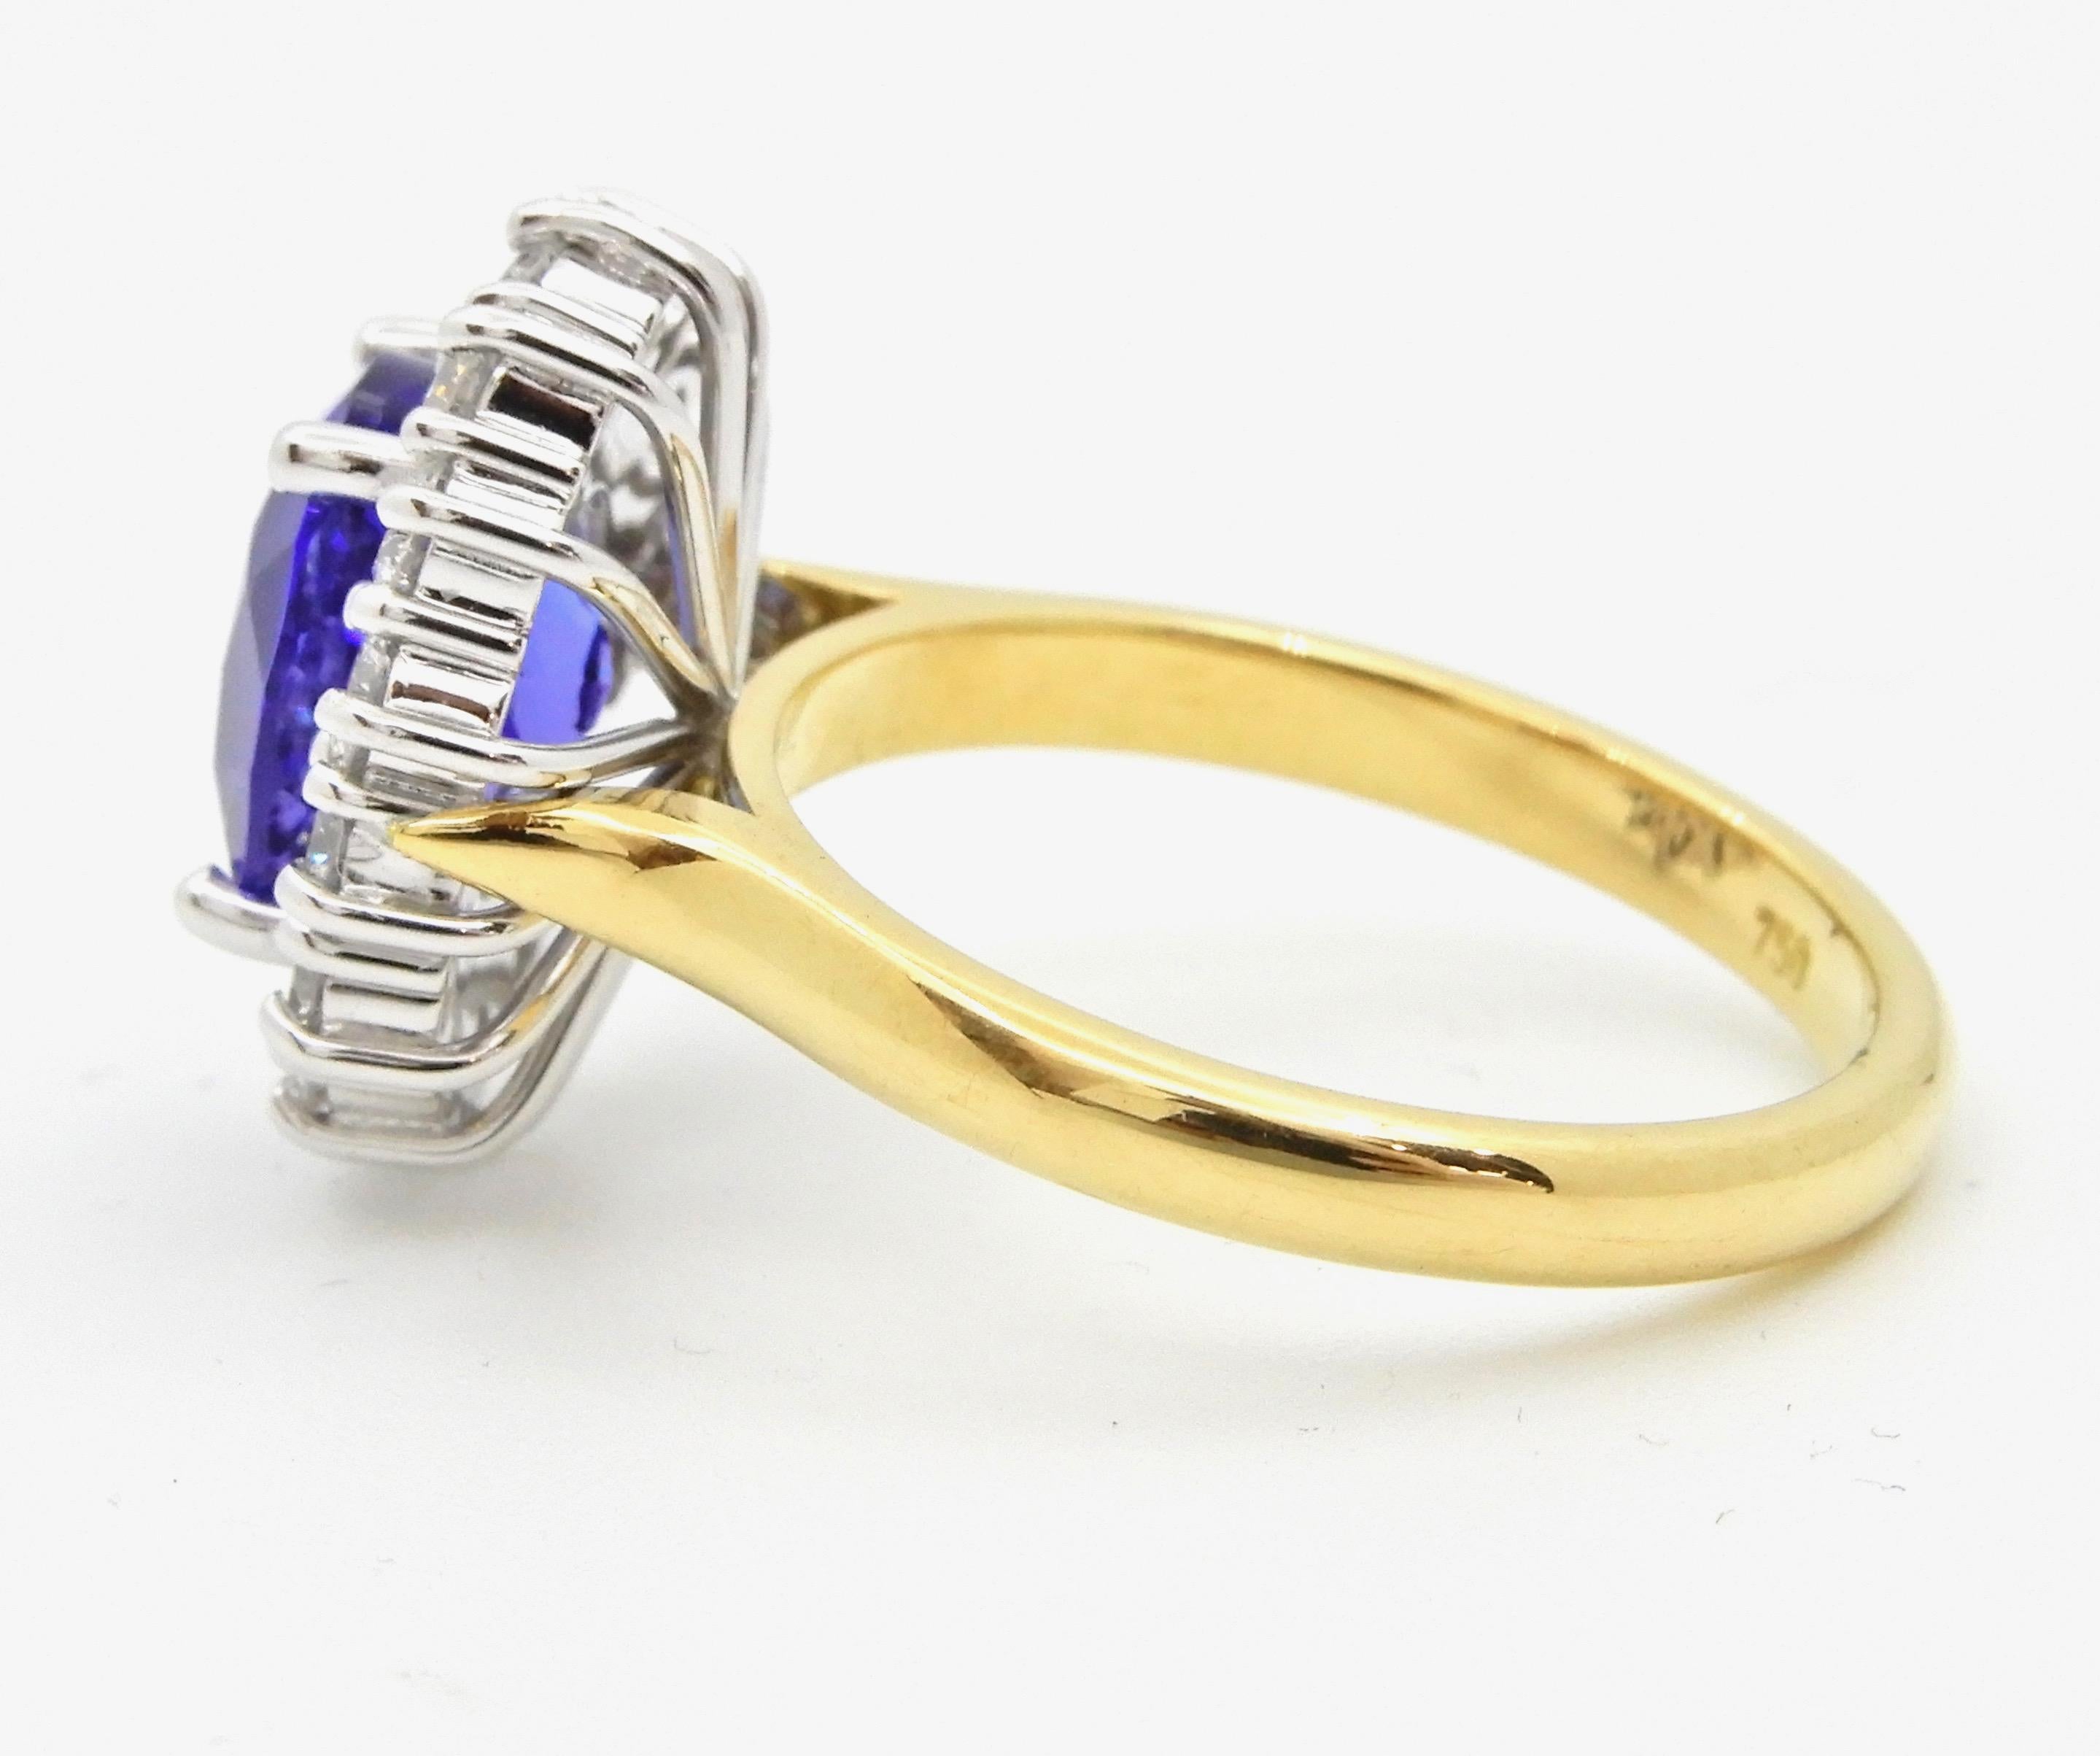 2.93 Carat Oval Cut Tanzanite Diamond Handmade 18 Carat Gold Cocktail Ring In New Condition For Sale In Brisbane, QLD